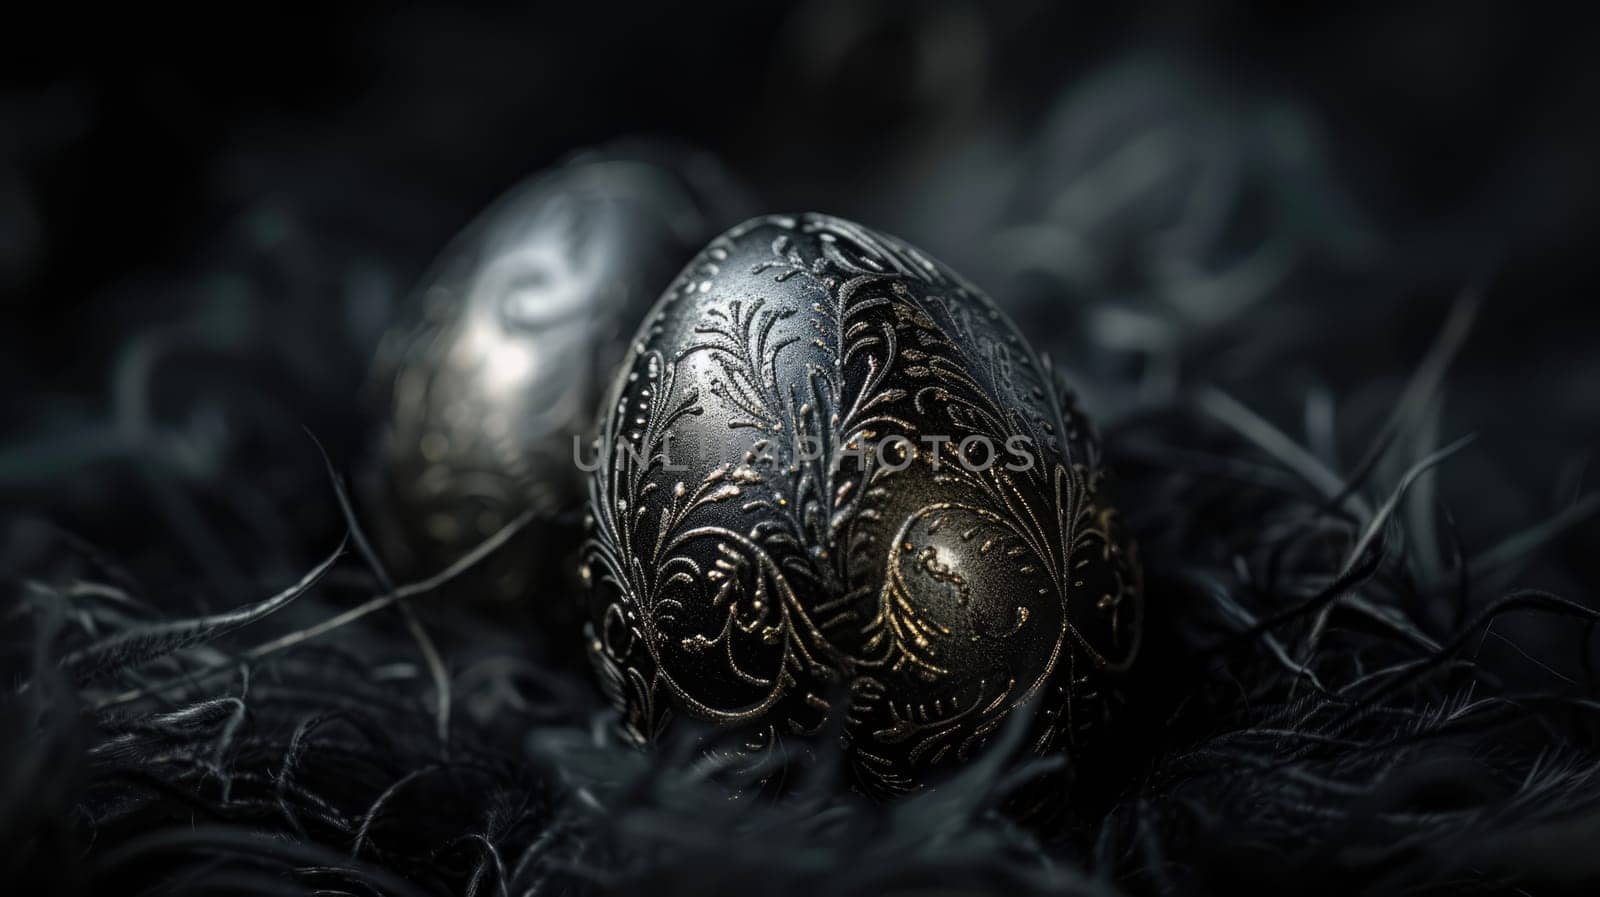 Silver metallic and black Easter Eggs on dark Background. Happy Easter eggs by JuliaDorian